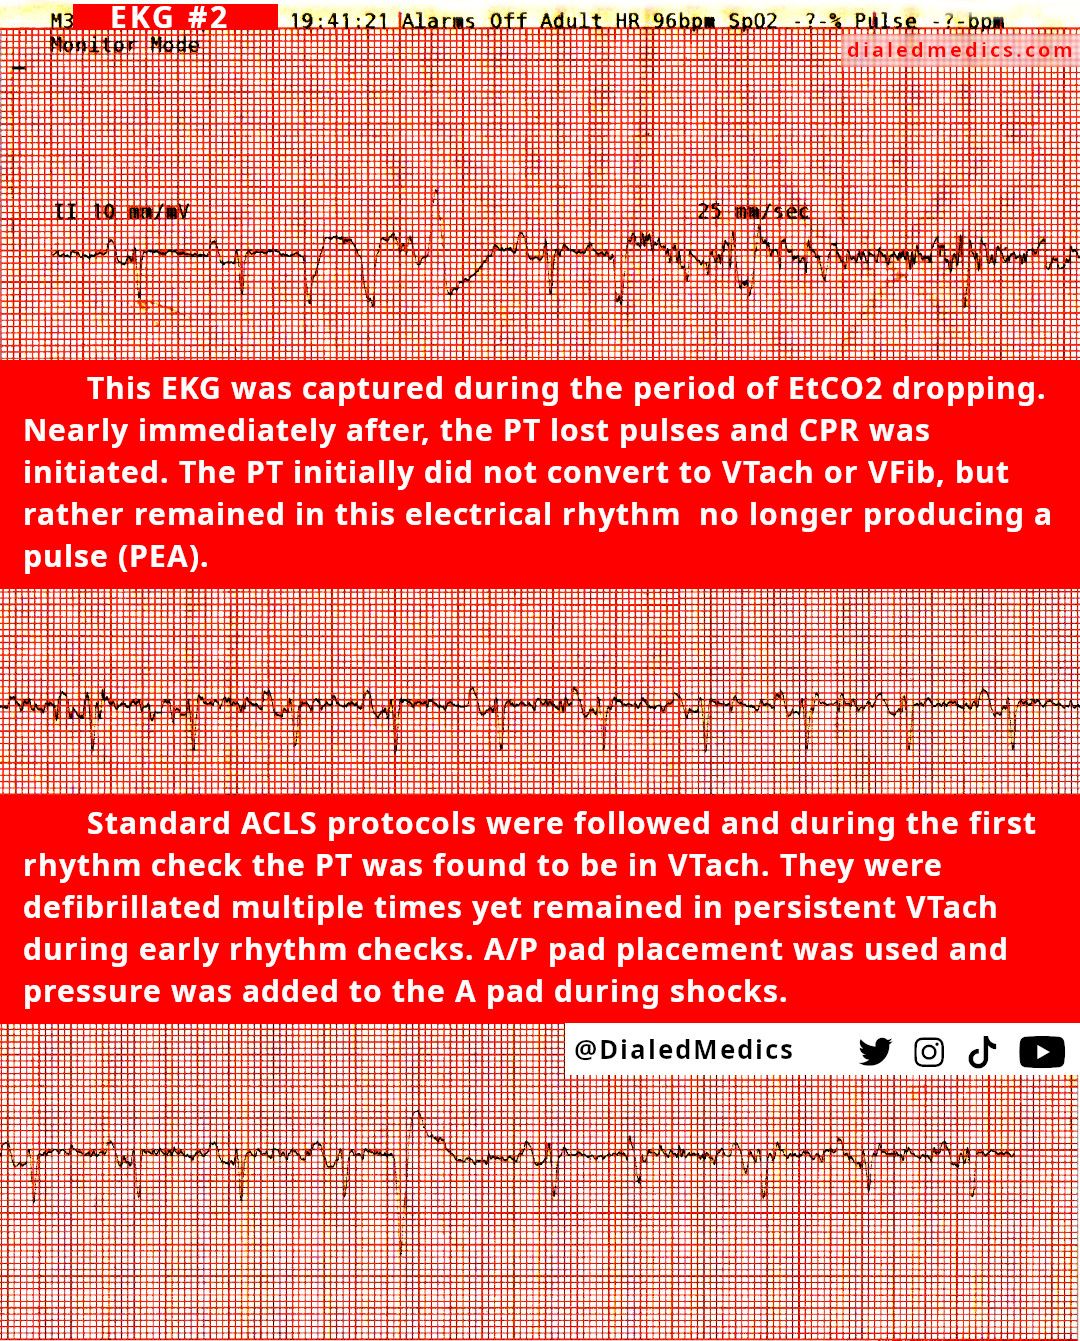 EKG #2 showing the degredation into PEA with a loss of palpable pulse and drop in EtCO2.